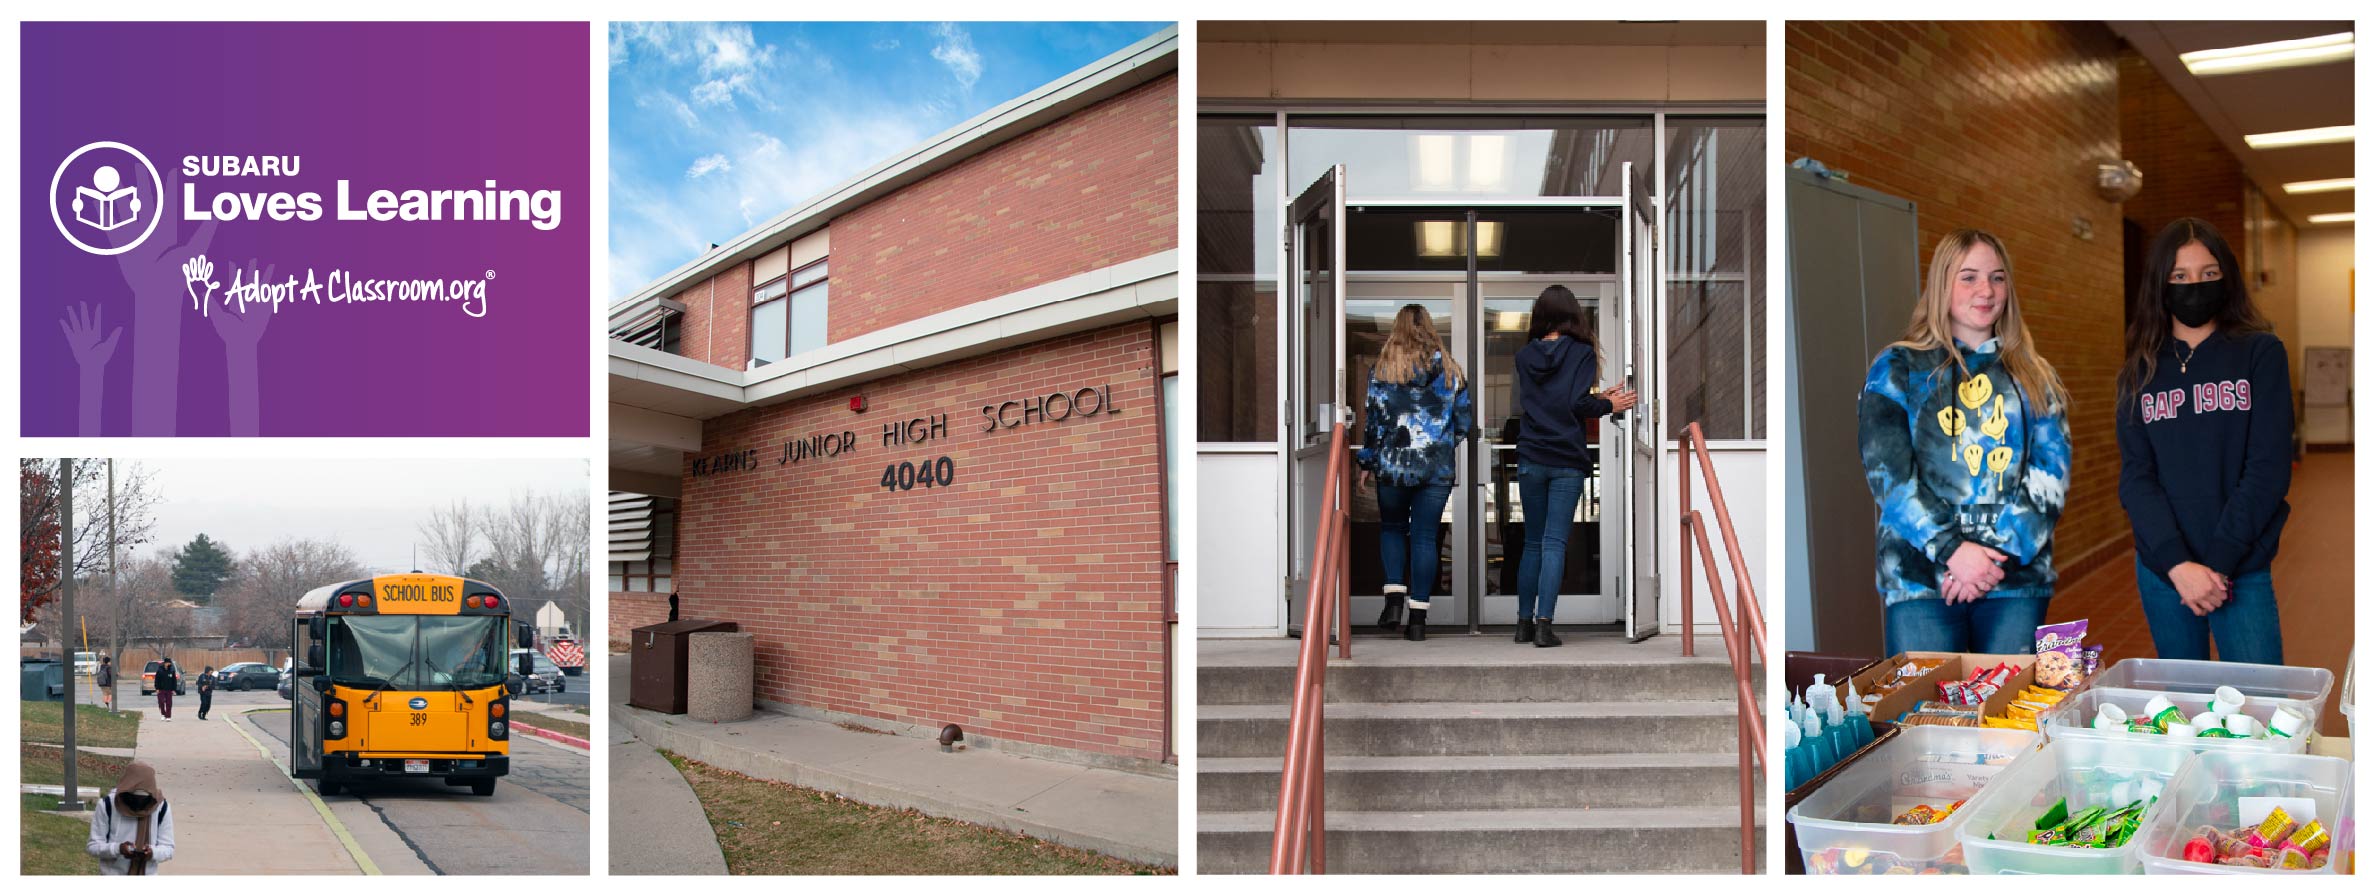 "Four vertical images of a school bus, brick building, two students entering the building, and students standing in front of snacks."